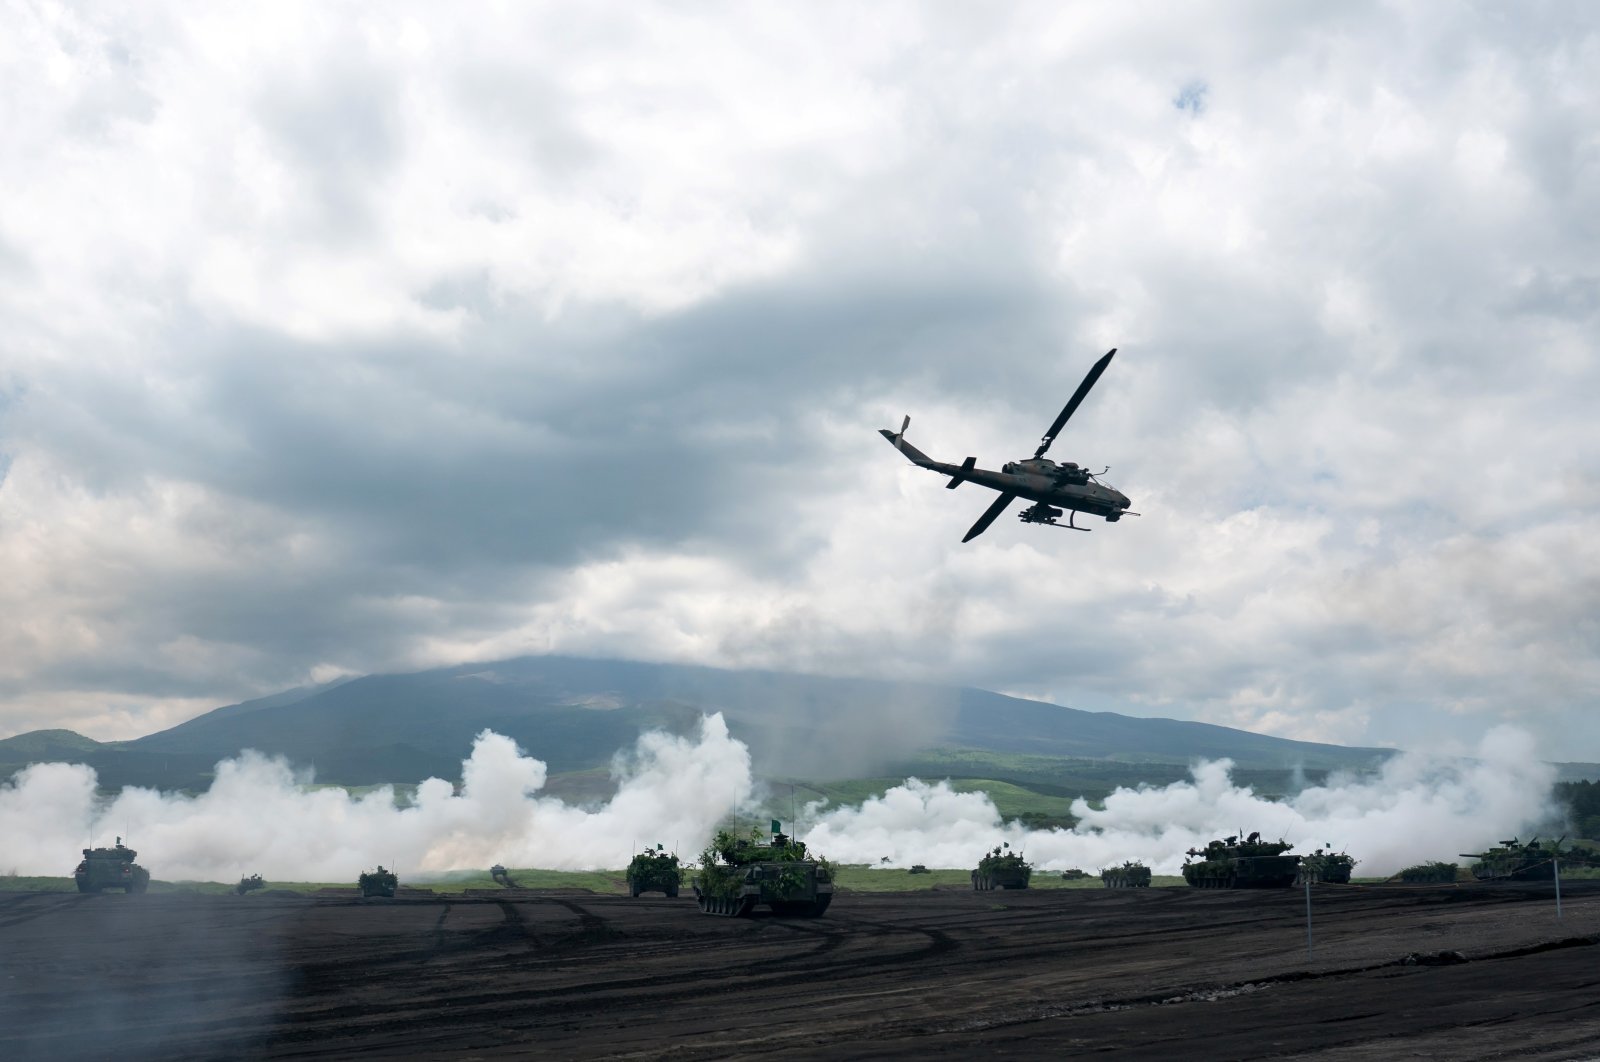 Japan Ground Self-Defense Force (JGSDF) battle tanks and a helicopter take part in the annual live-fire exercise at East Fuji Maneuver Area, in Gotemba, Shizuoka, Japan, May 28, 2022. (Reuters Photo)